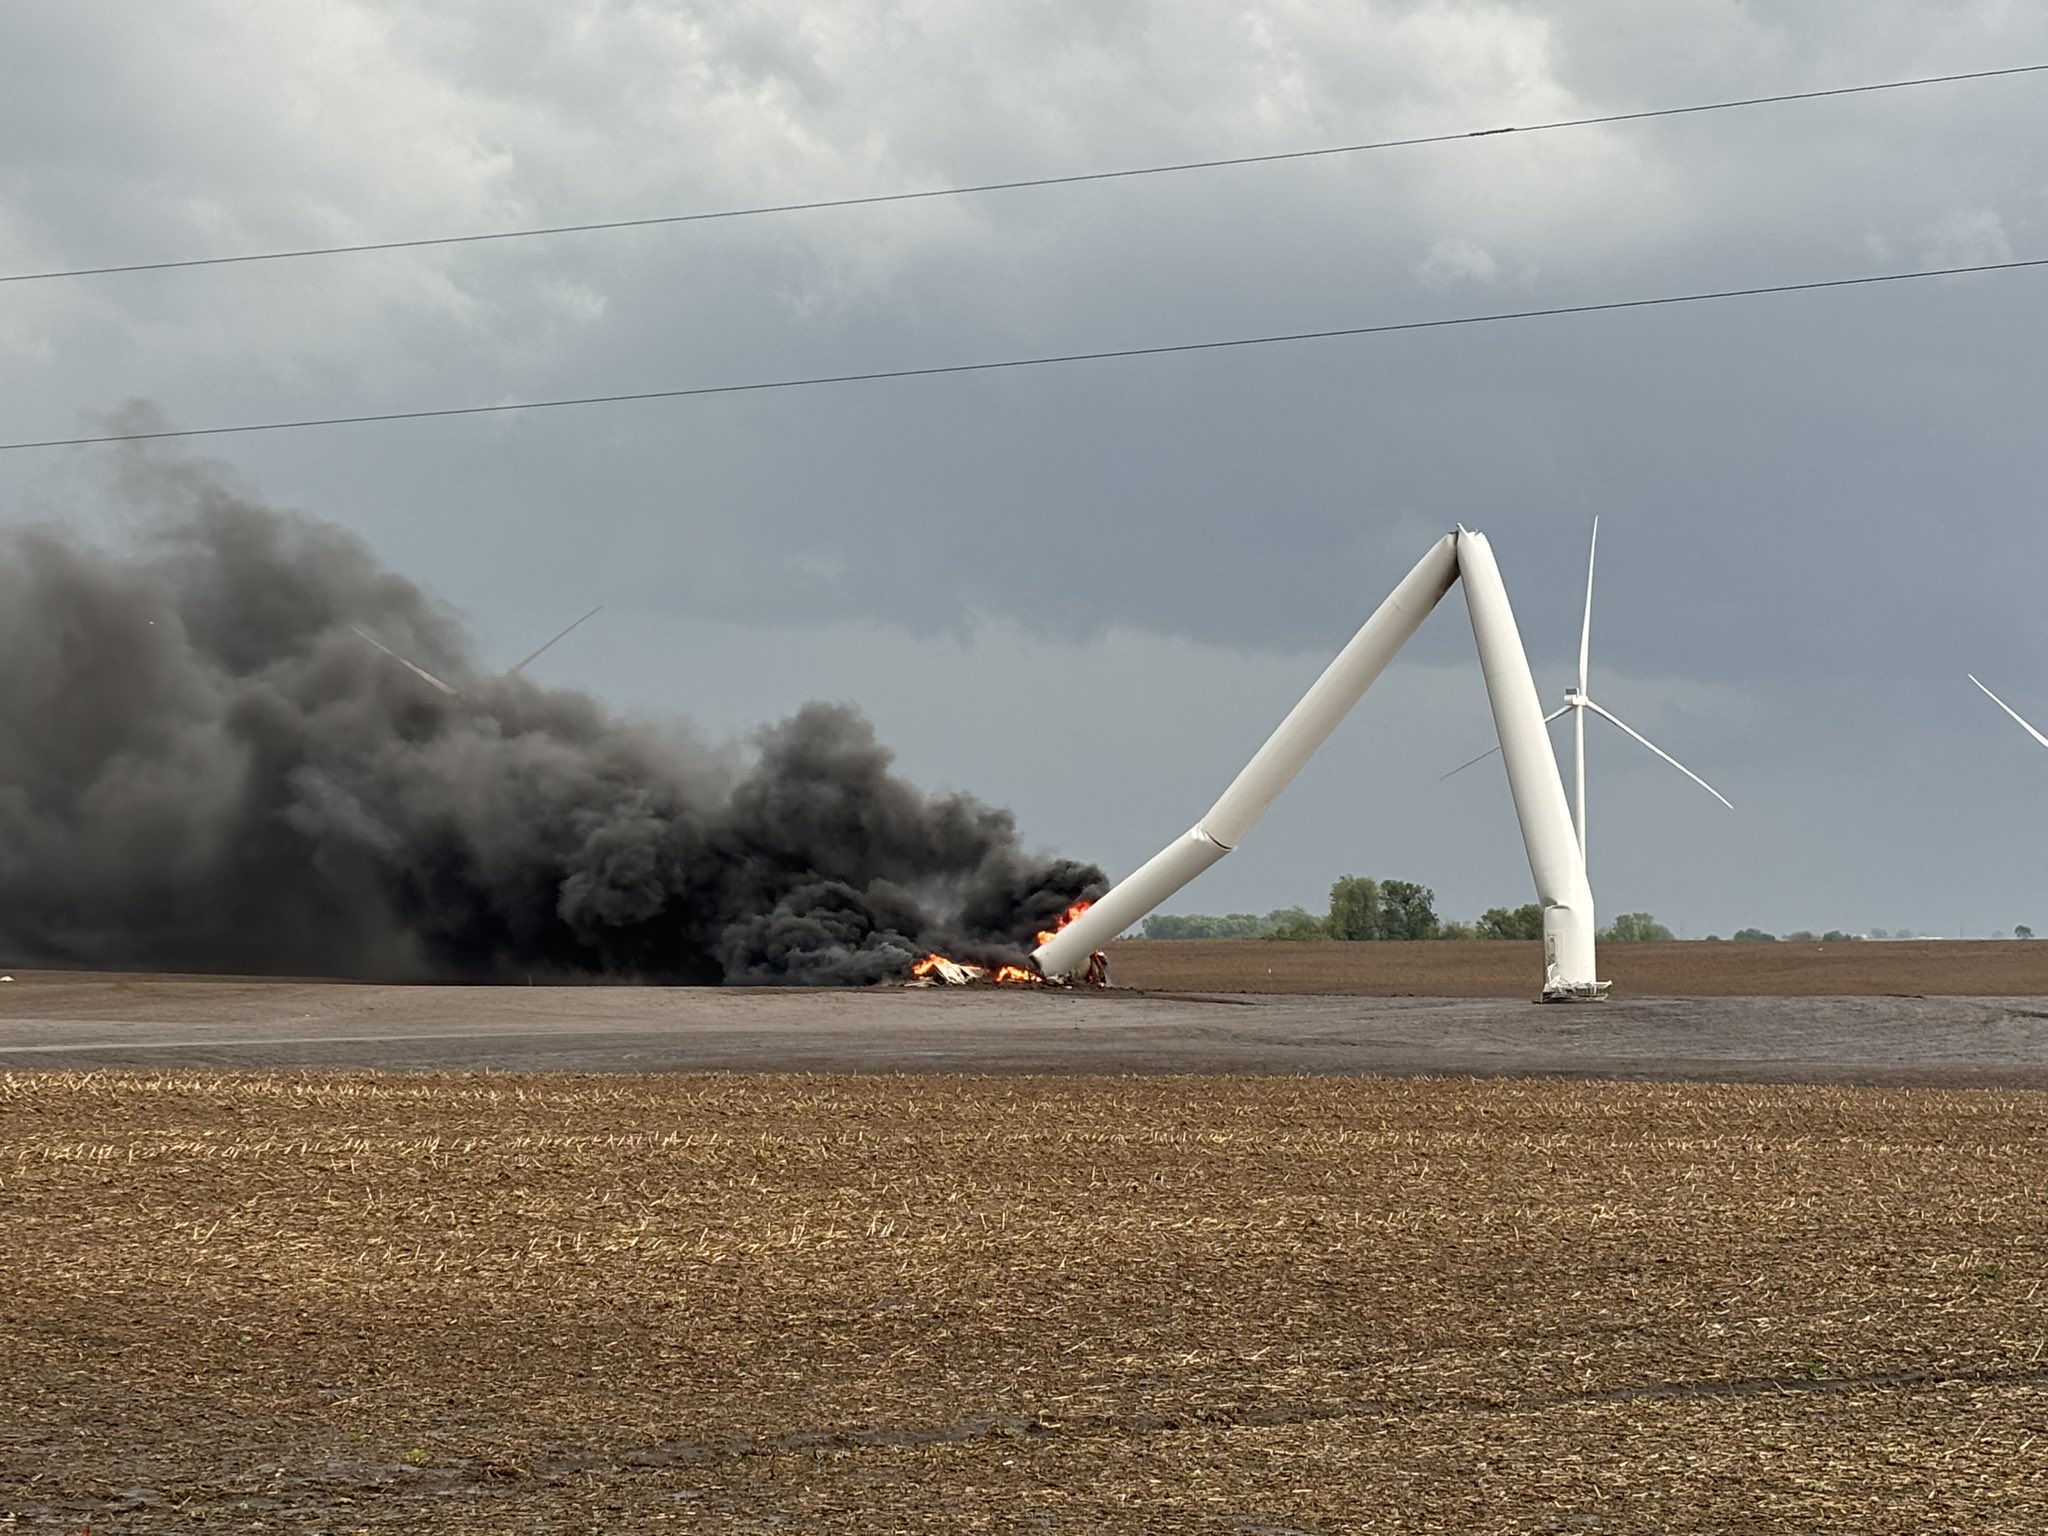 A wind turbine that was knocked down and caught fire northeast of Corning, Iowa after being struck by the Greenfield tornado.